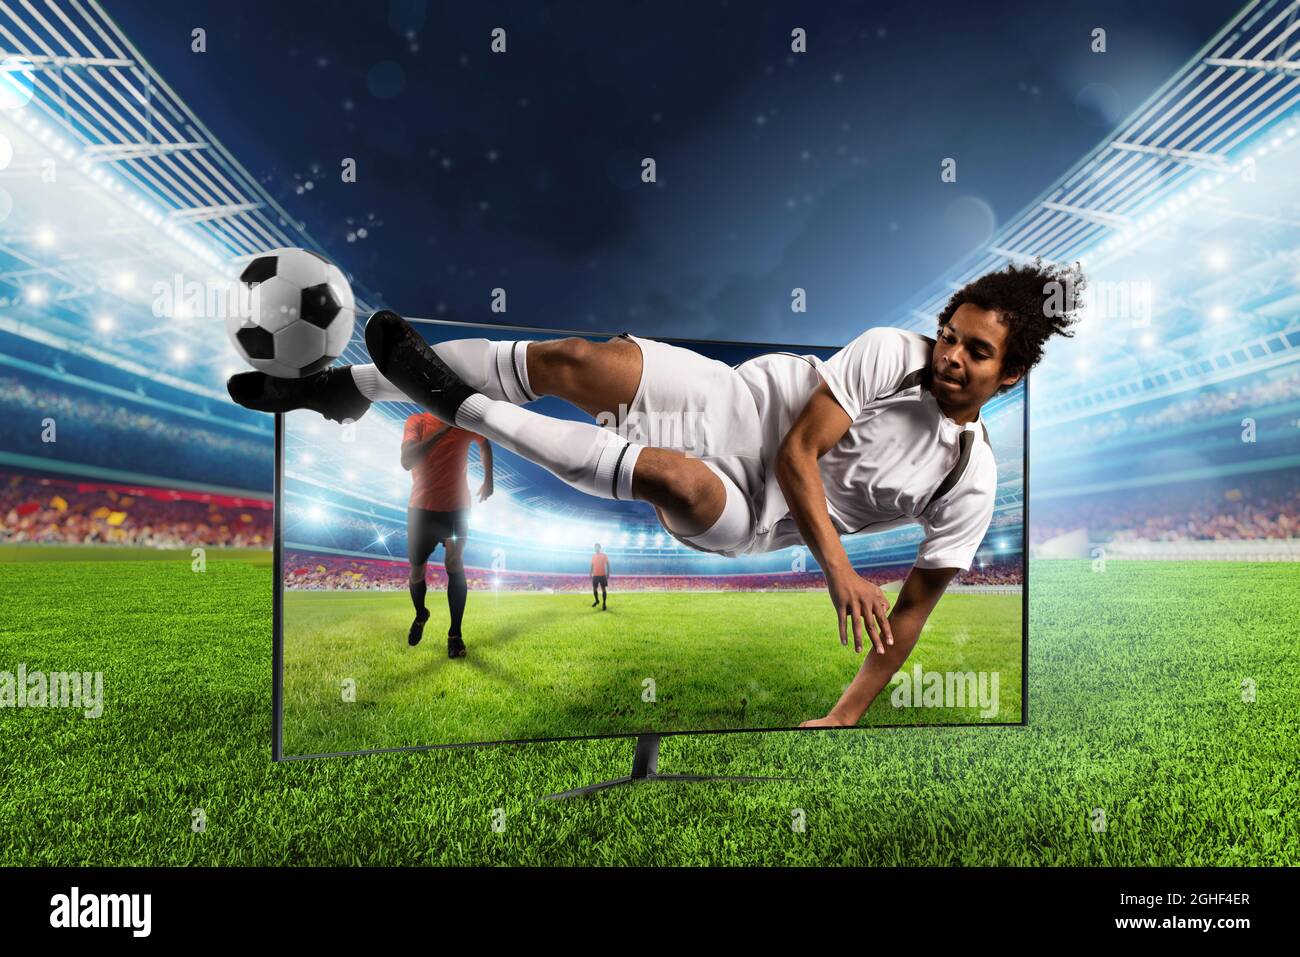 Streaming tv channel of soccer player who kicks the ball Stock Photo